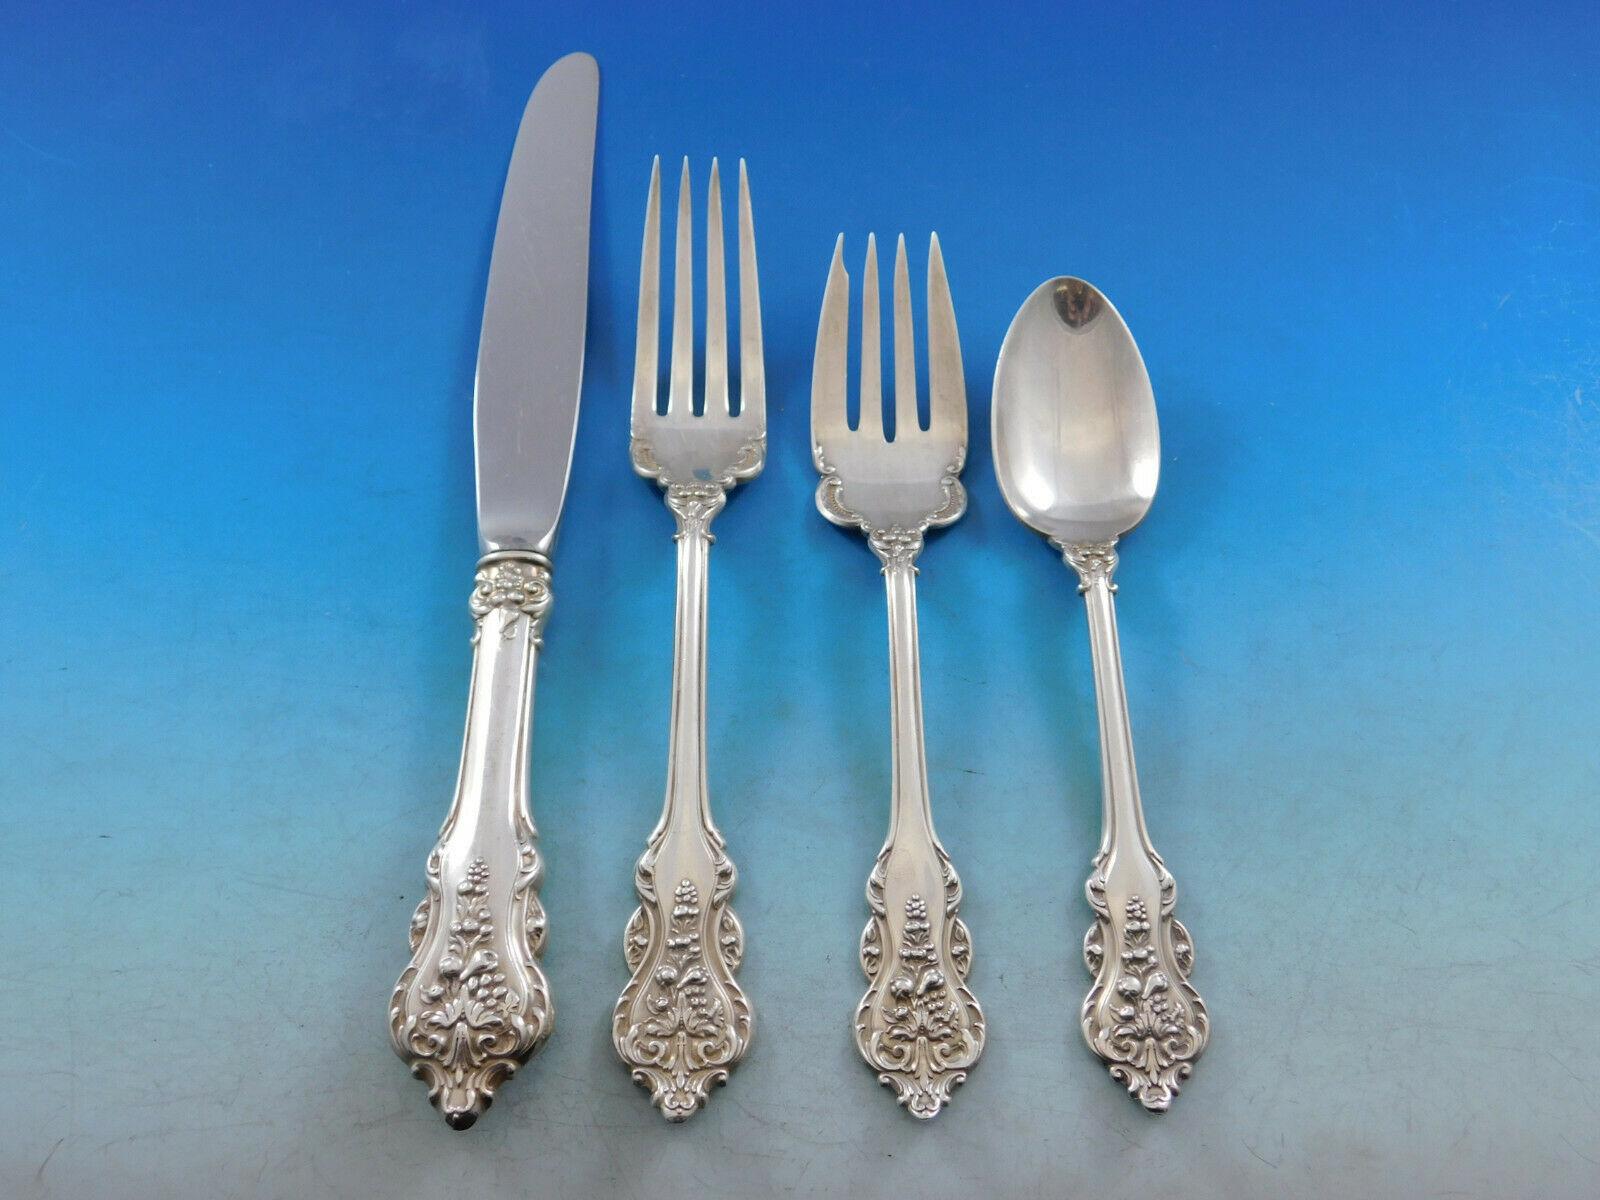 Donatello by Amston, circa 1912, sterling silver Flatware set - 43 Pieces. This set includes:
 
8 Knives, 9 1/8